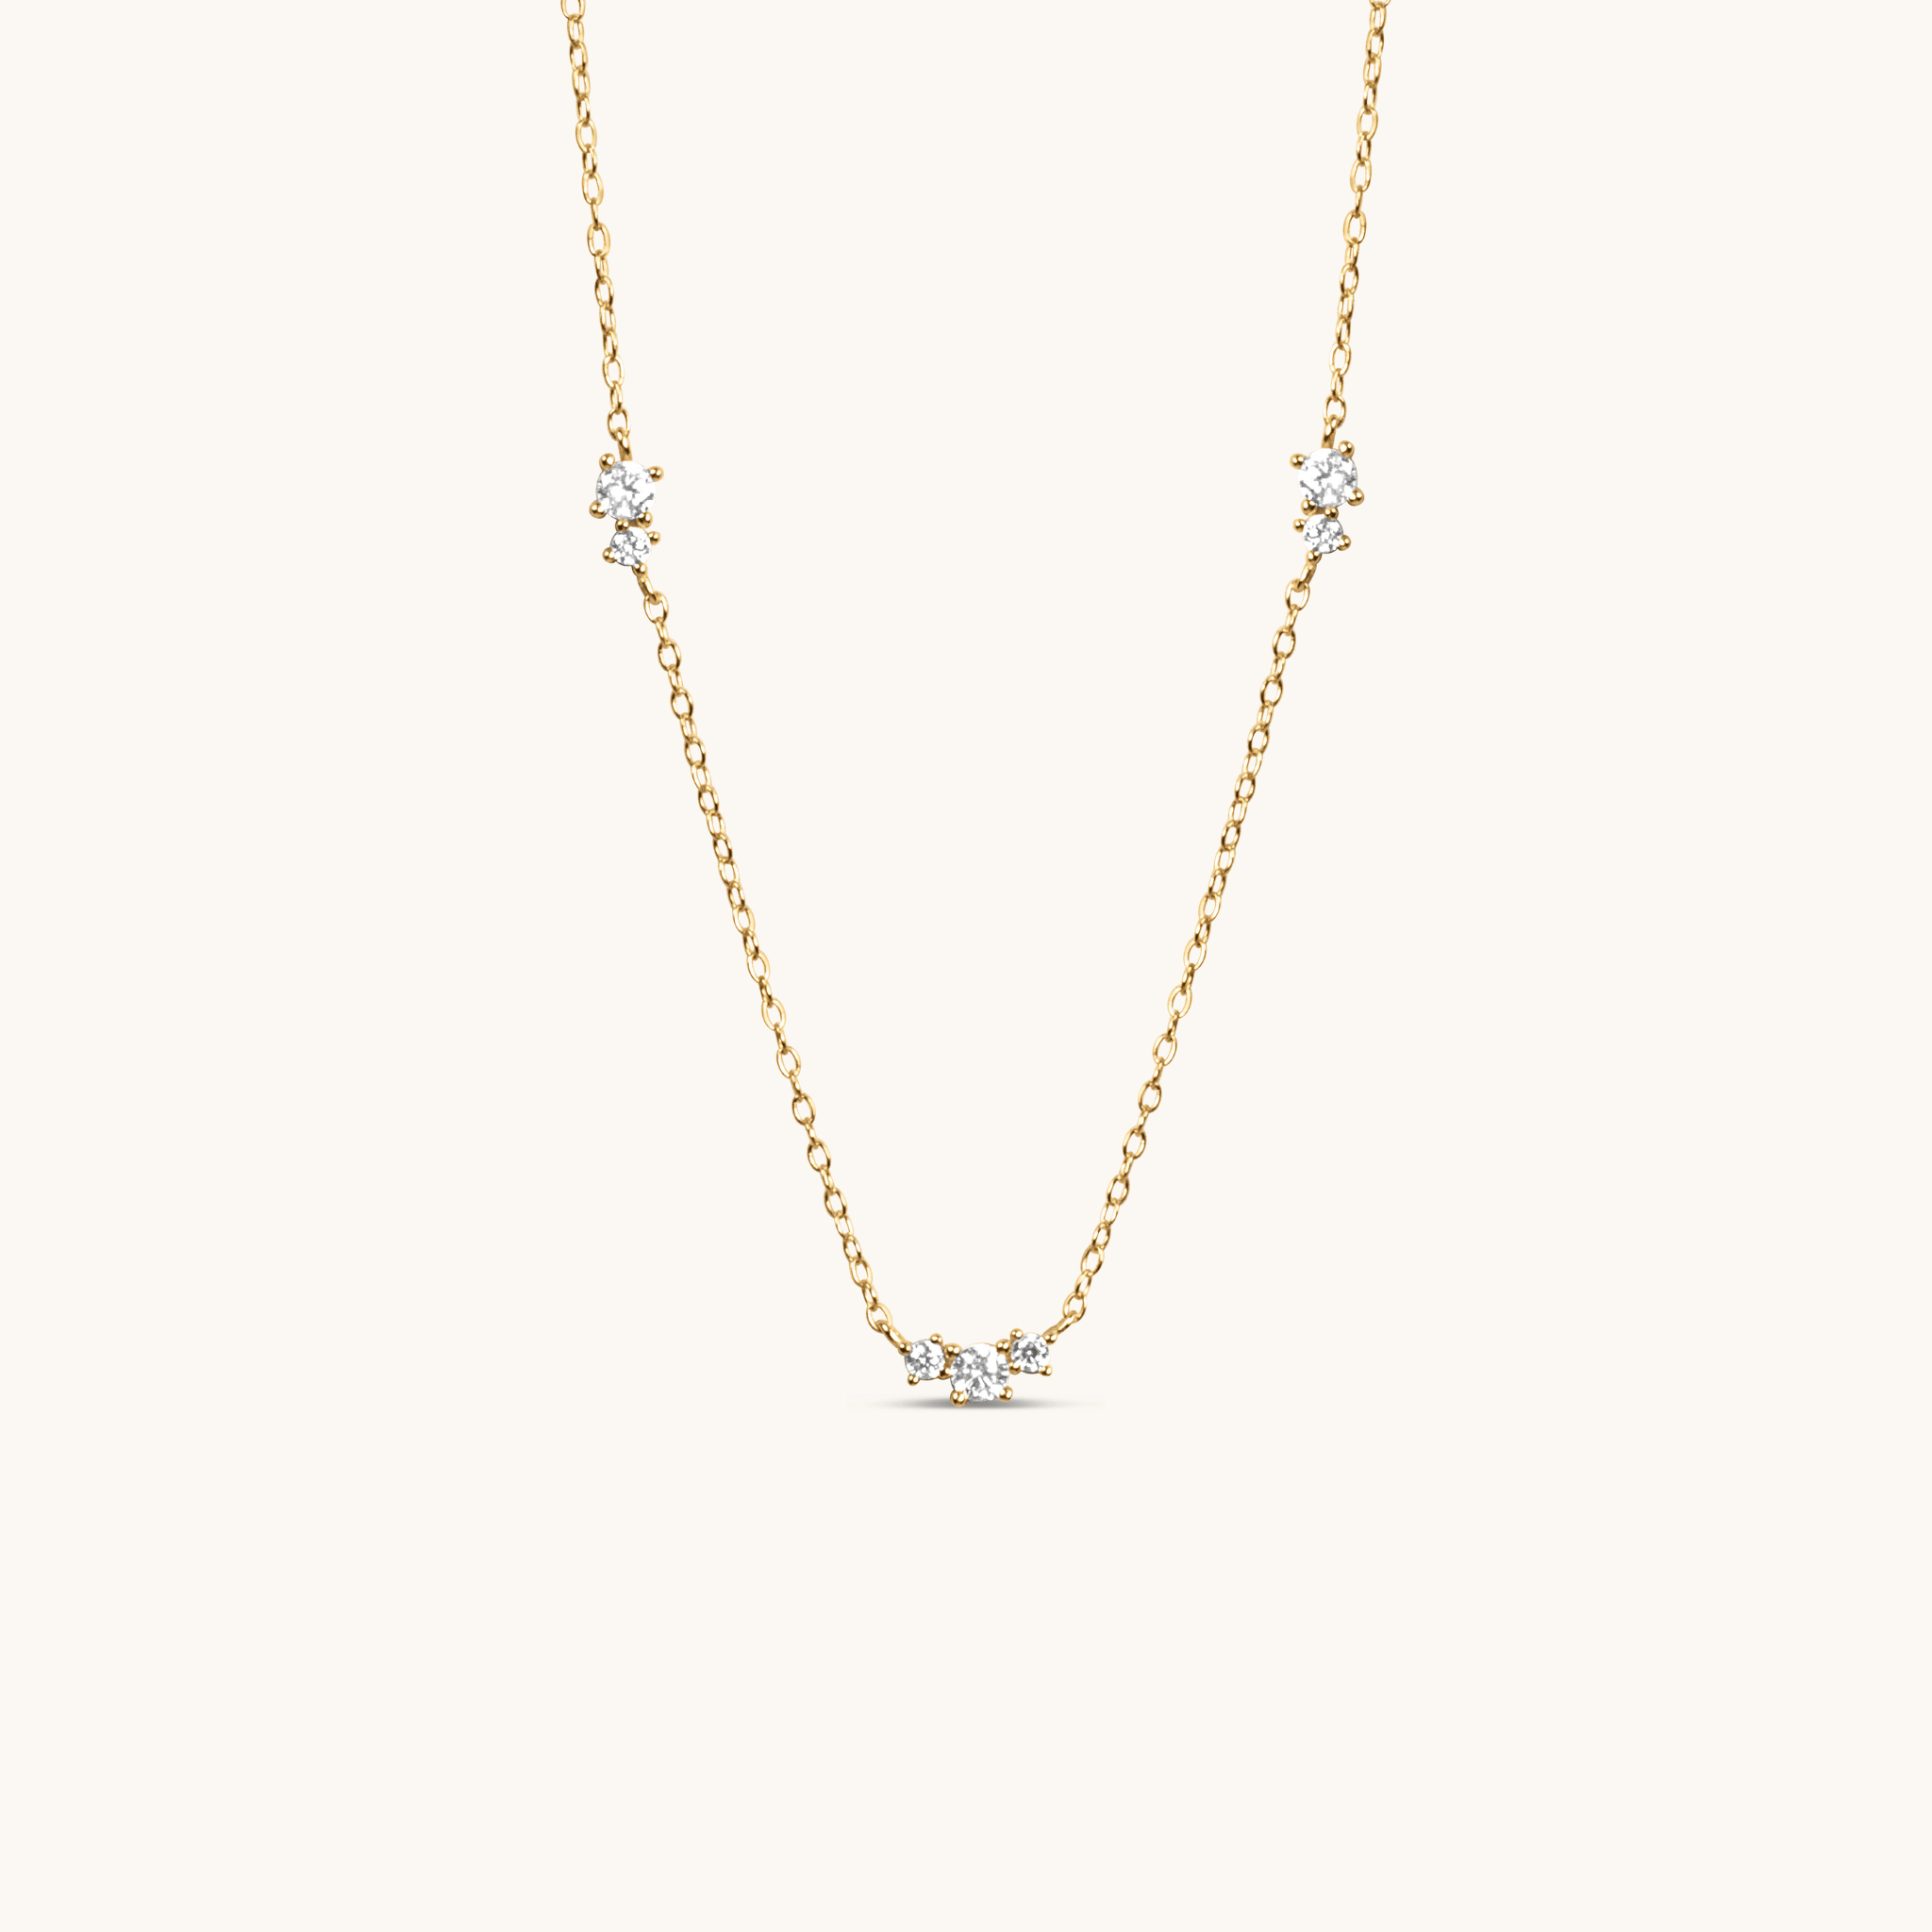 Gold floating cubic zirconia necklace